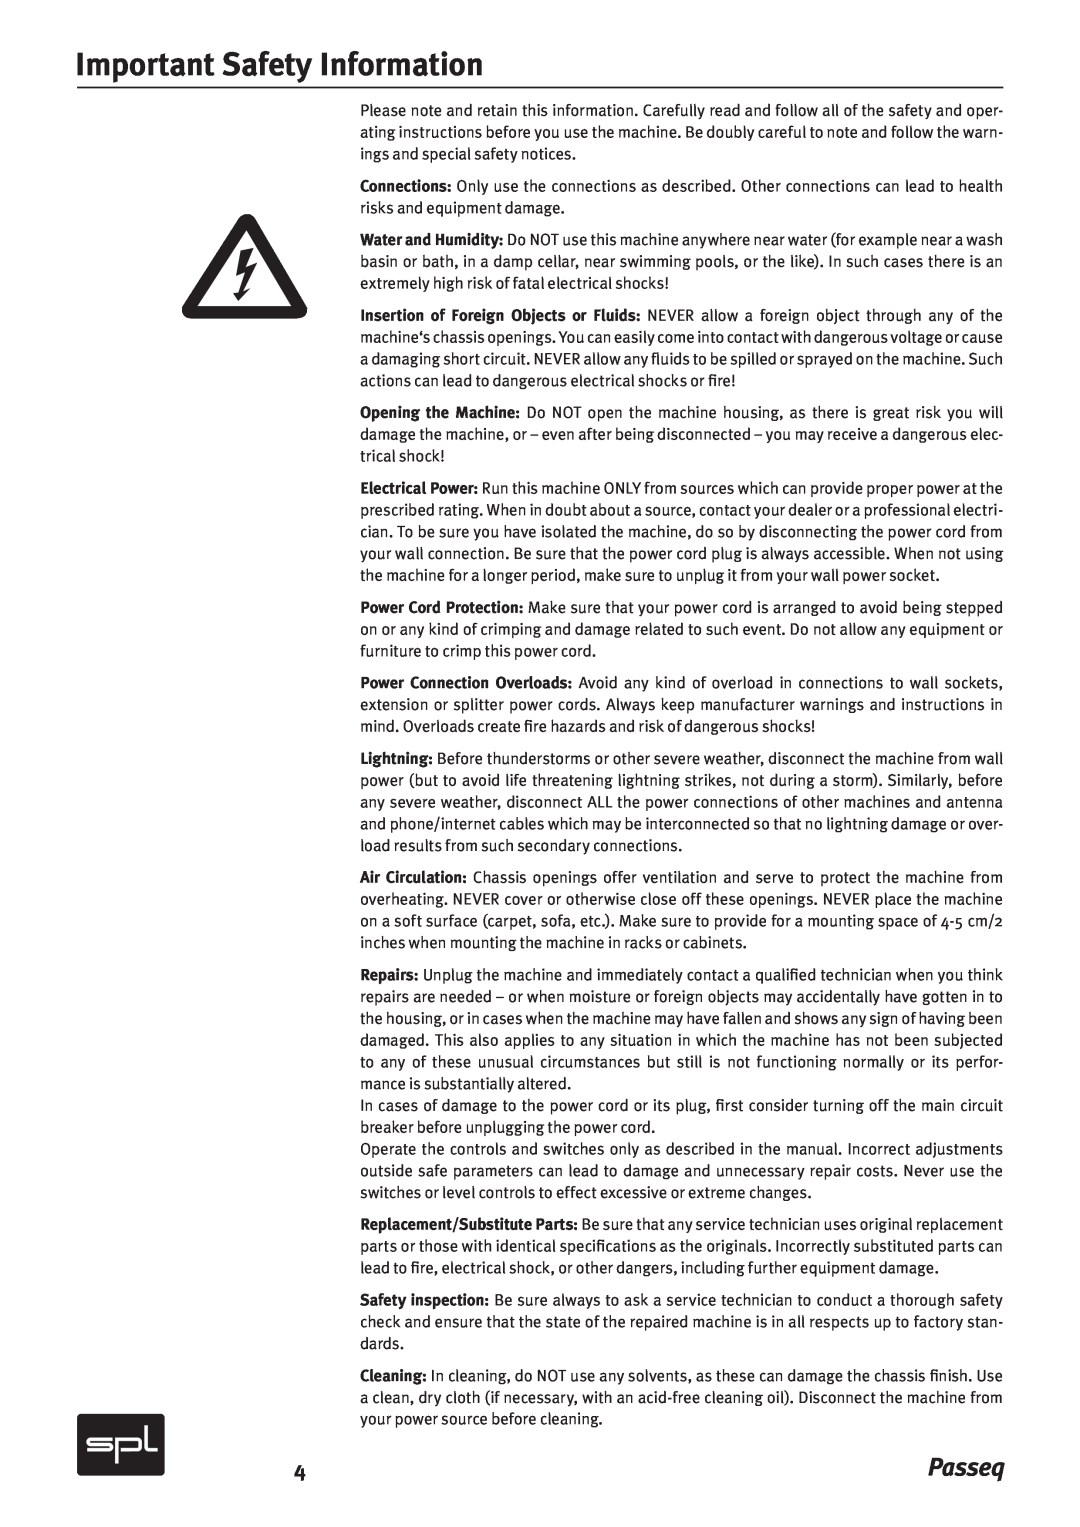 Sound Performance Lab 2595 manual Important Safety Information, Passeq 